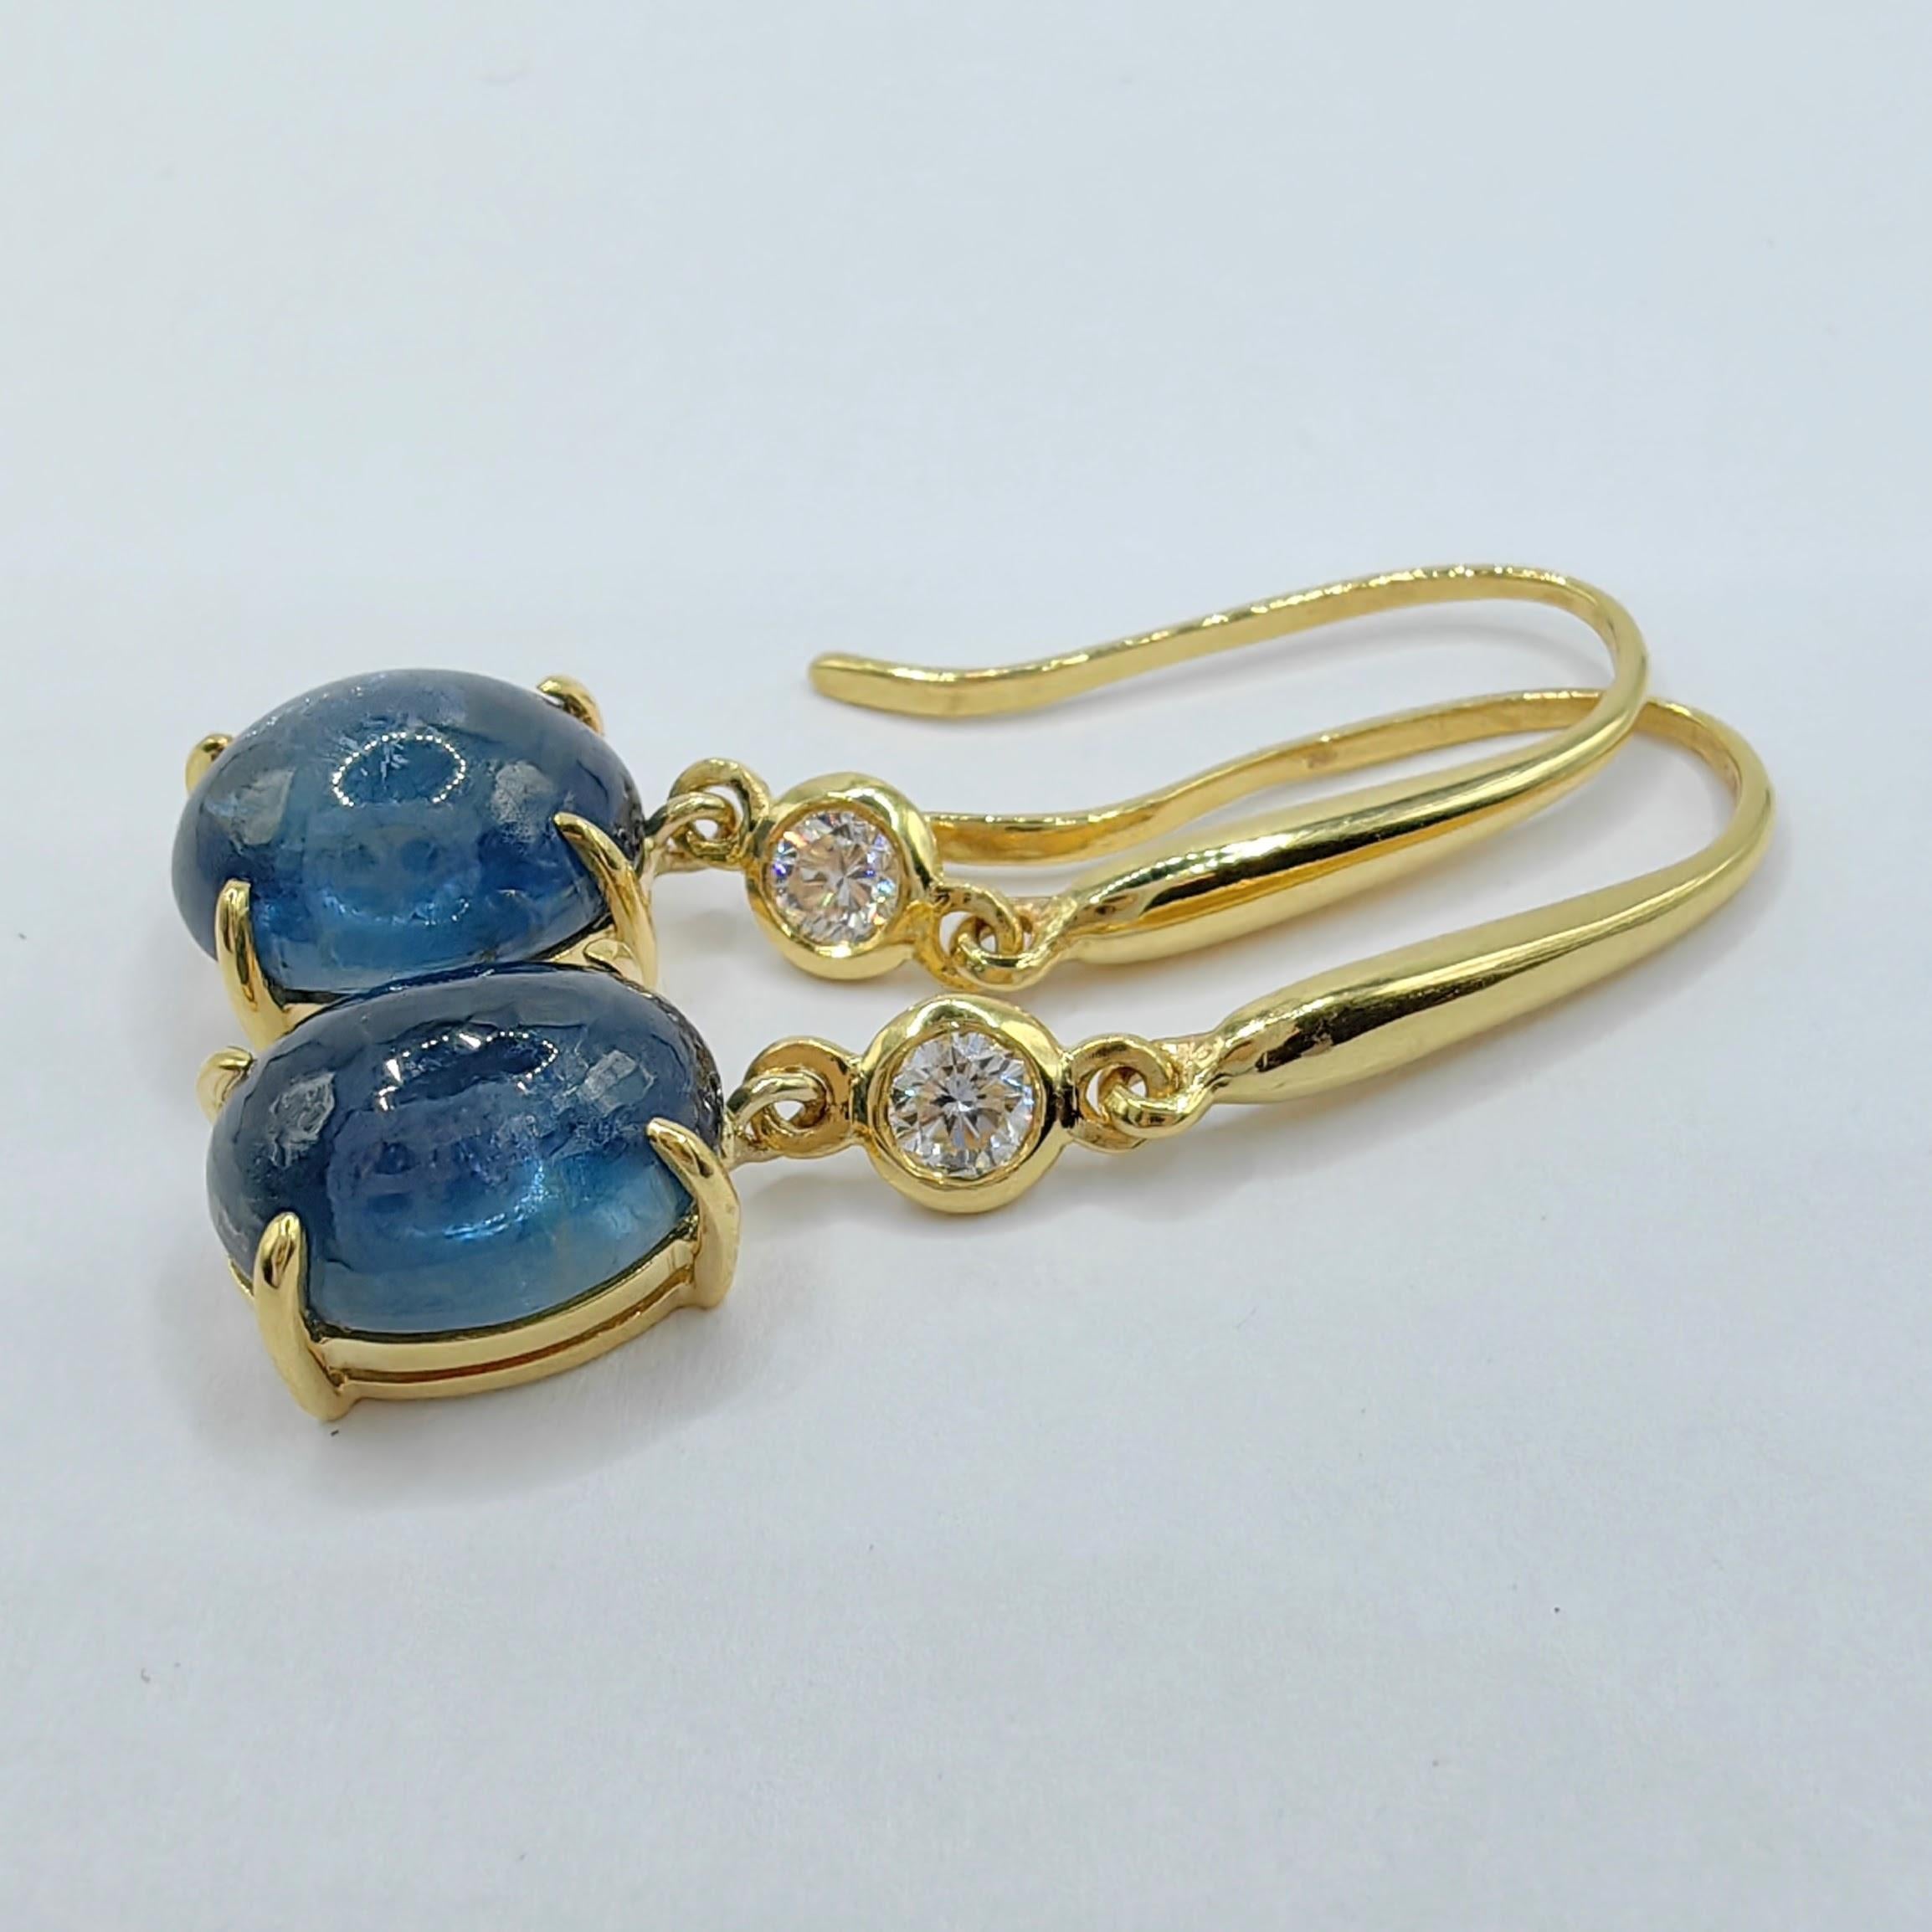 6.13ct Cabochon Blue Sapphire Diamond Dangling Earrings in 18K Yellow Gold For Sale 2